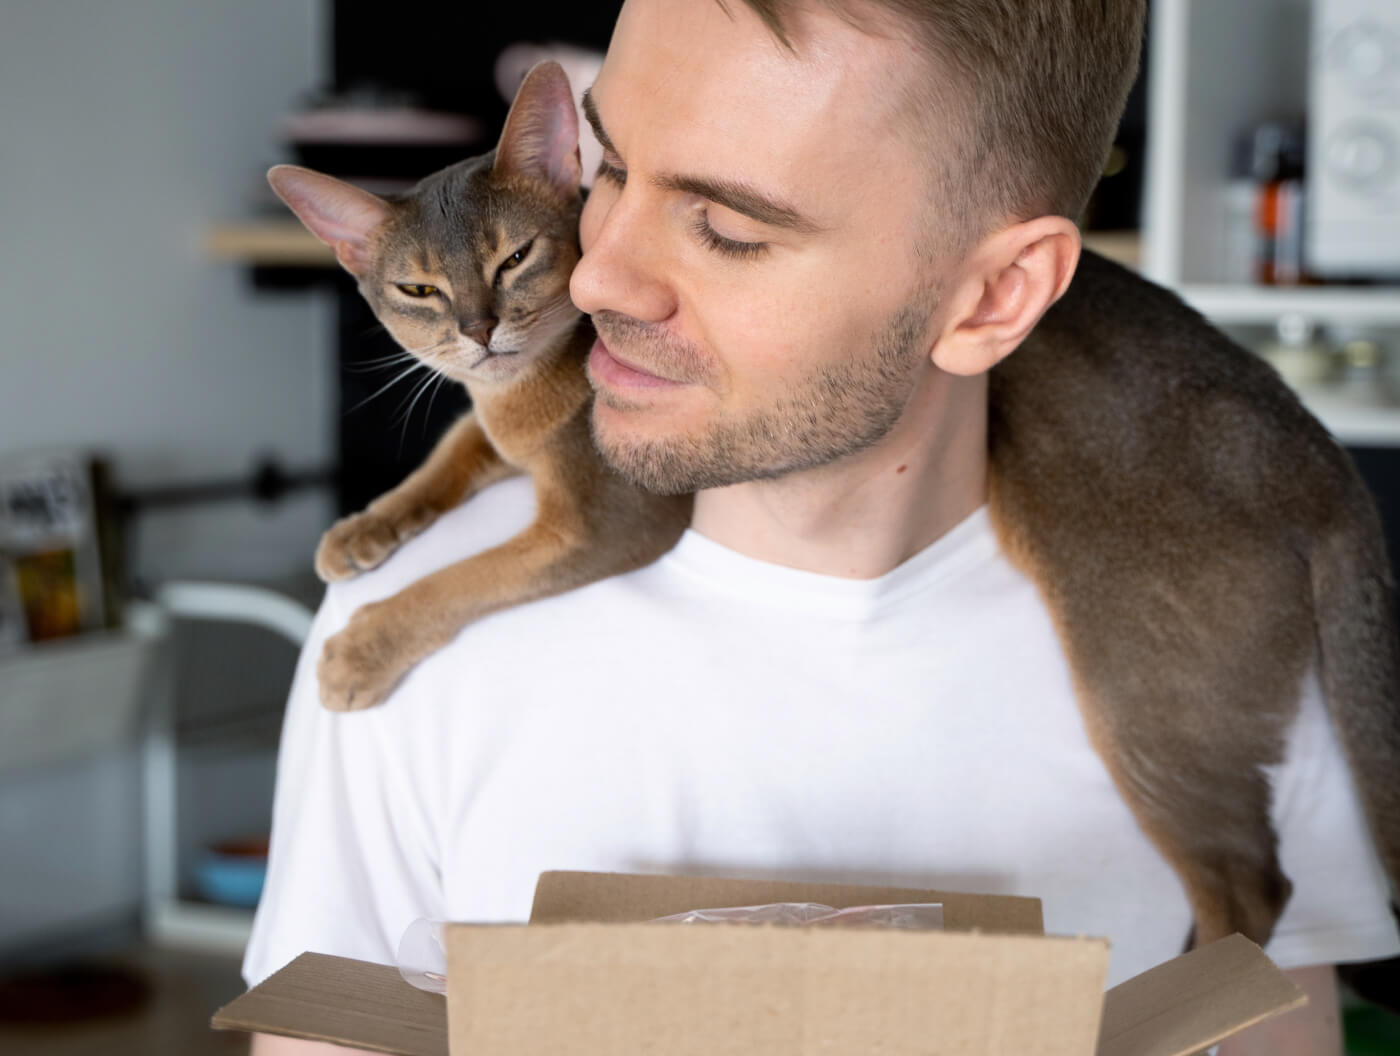 Man receives Autoship package with cat on his shoulders